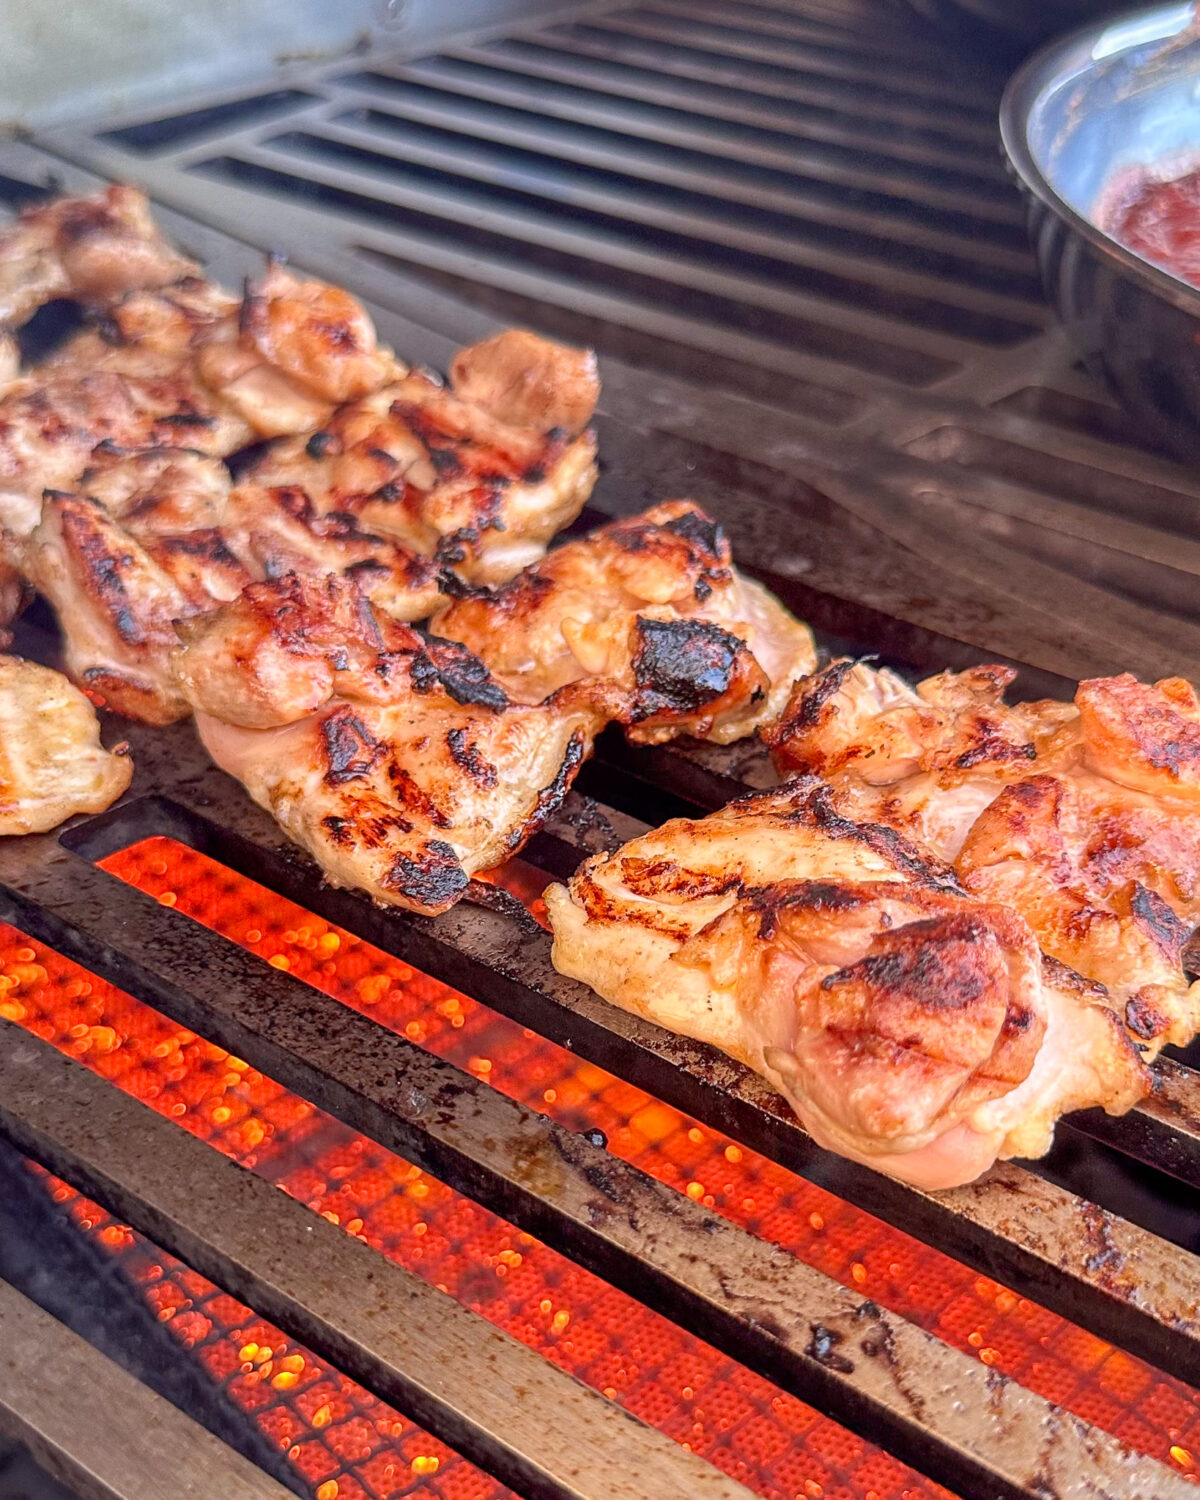 Grill chicken thighs until lightly charred on both sides and the internal temperature reaches 165°F or more.